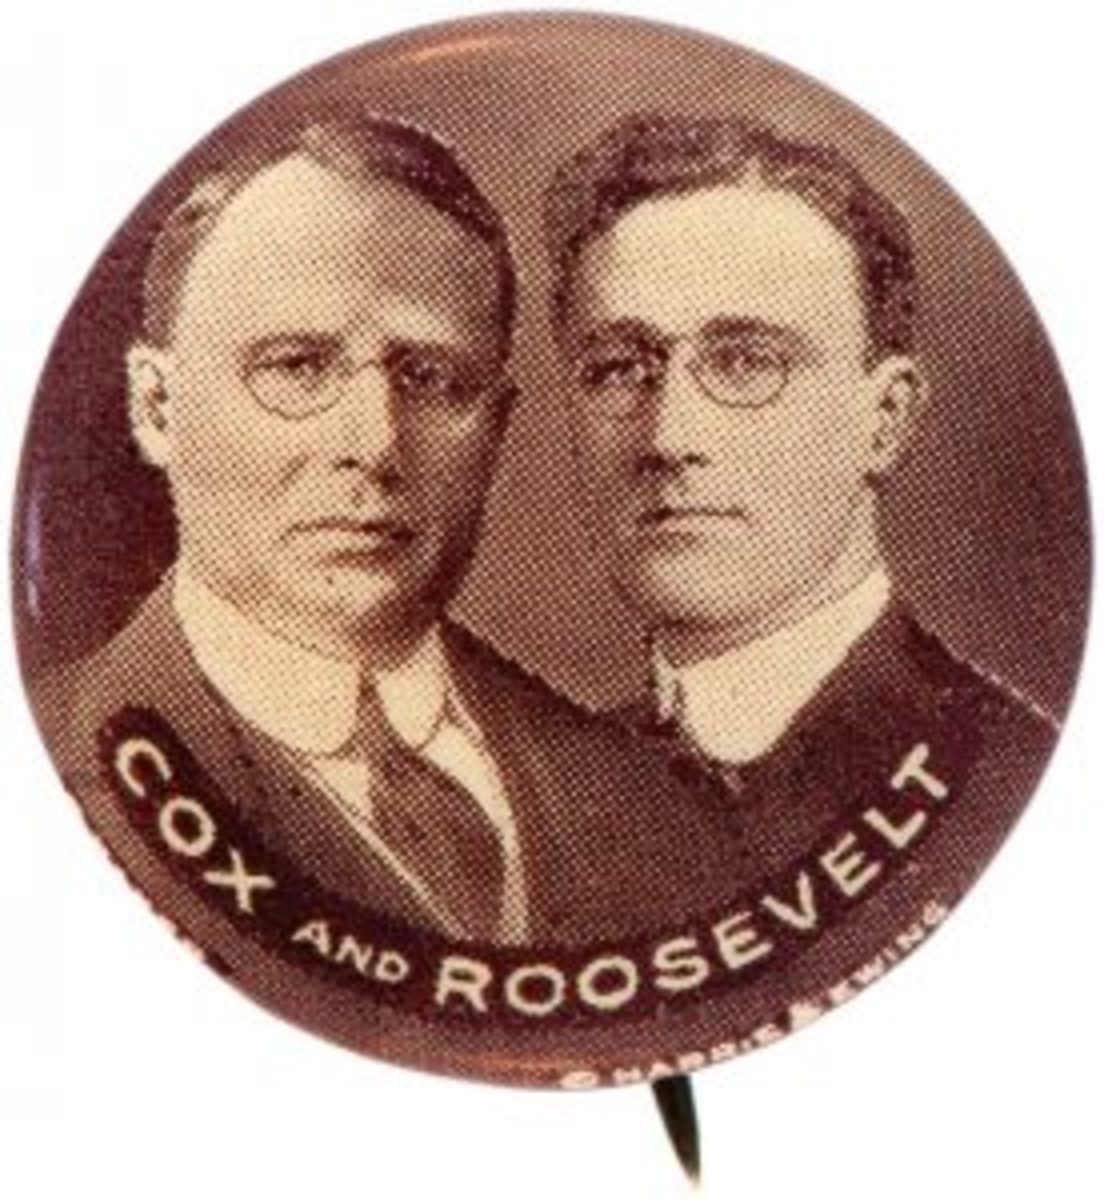 Cox and Roosevelt jugate